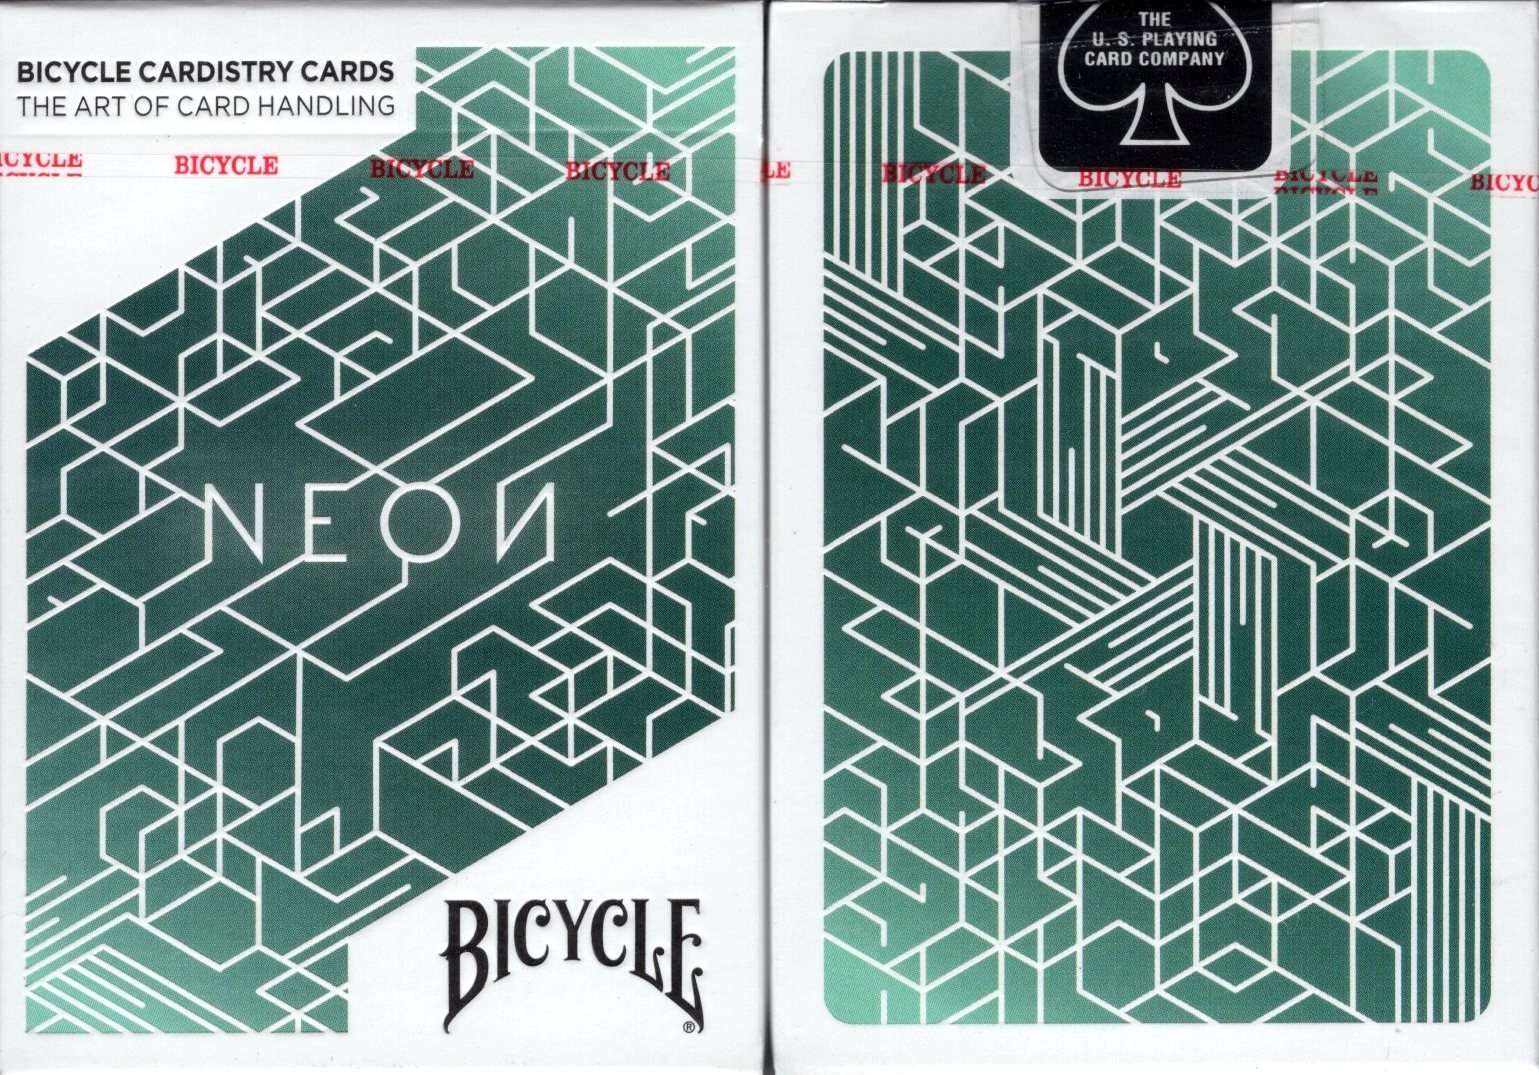 PlayingCardDecks.com-Neon Cardistry Bicycle Playing Cards